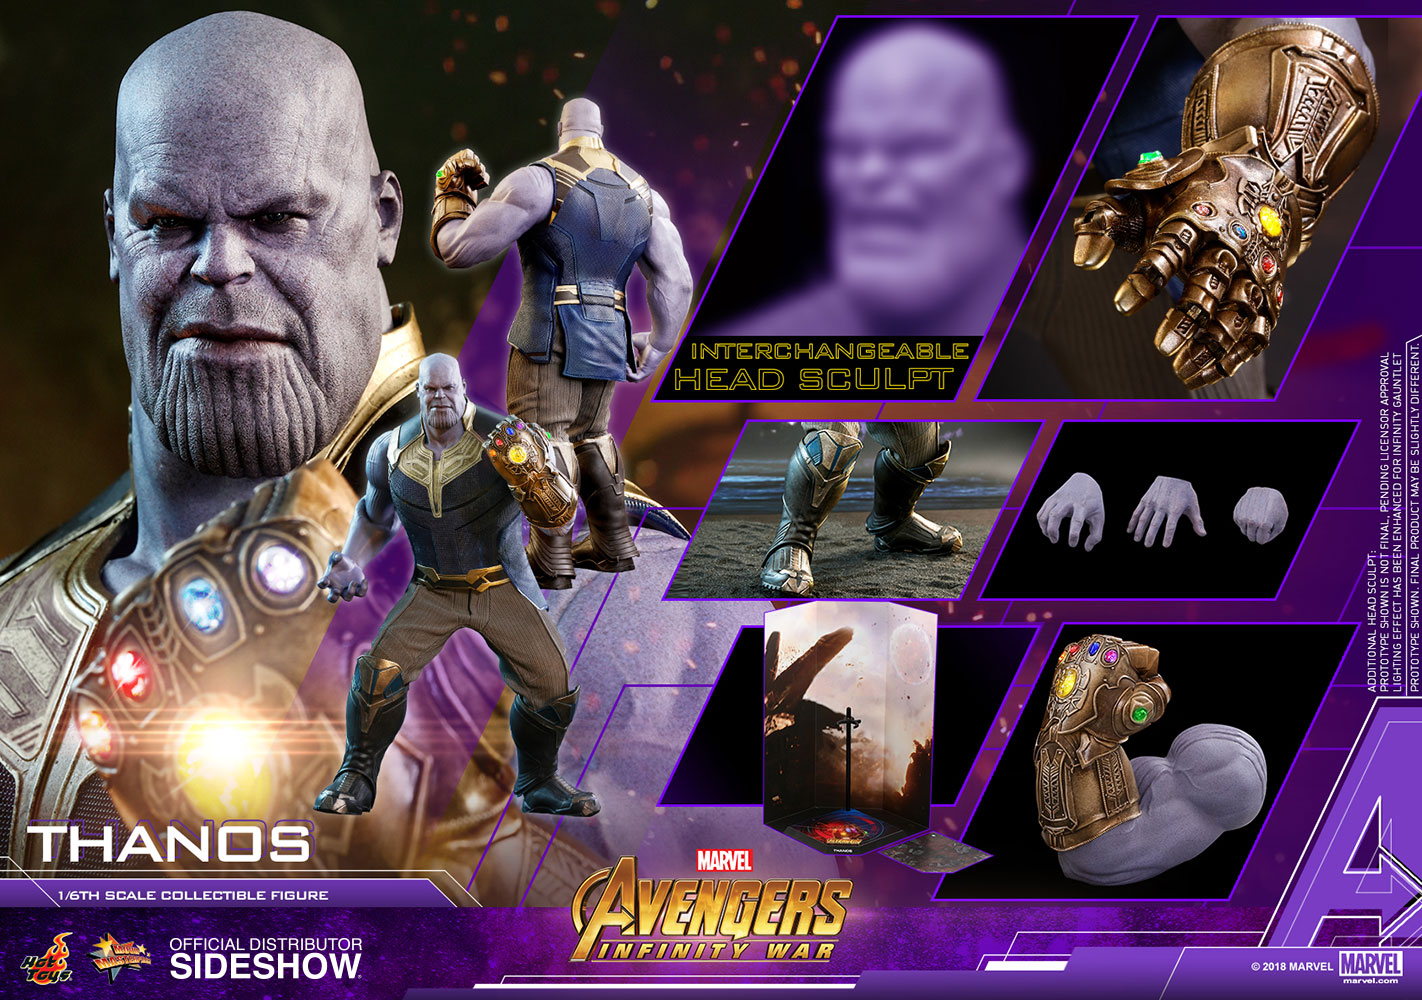 marvel-avengers-infinity-war-thanos-sixth-scale-figure-hot-toys-903429-24